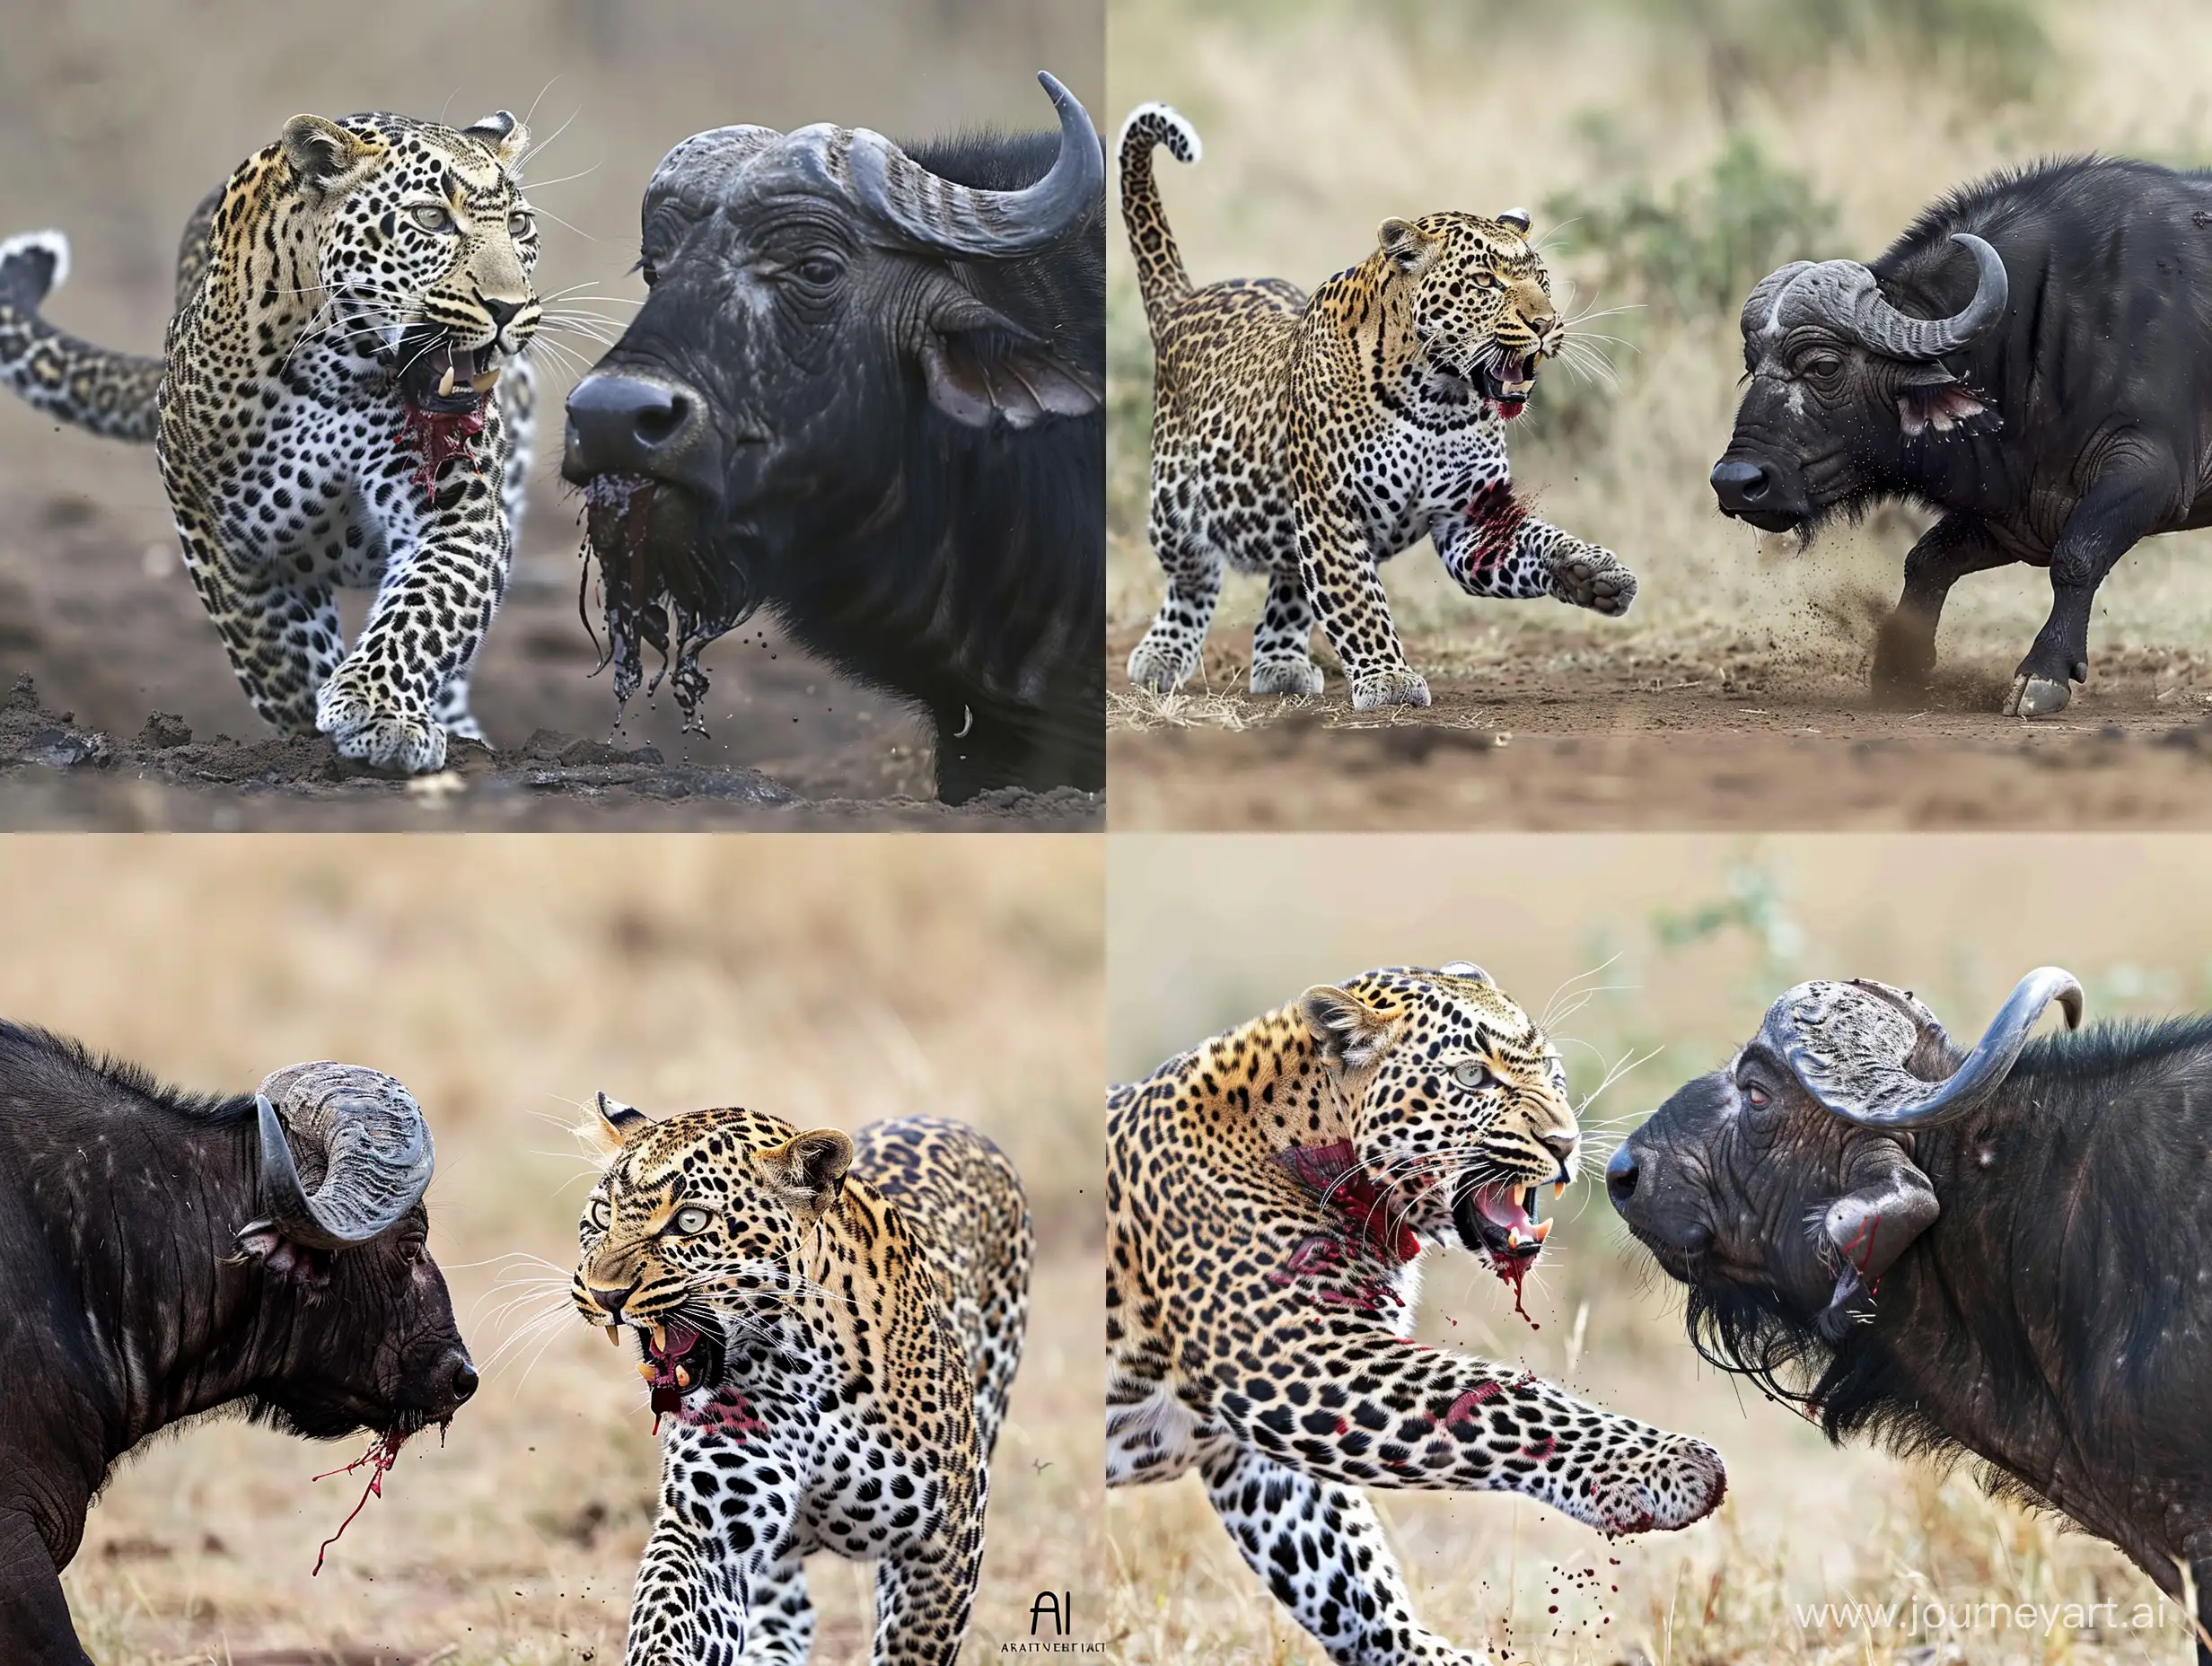 Fierce-Leopard-Confronts-Wild-Buffalo-A-Raw-Encounter-in-the-Heart-of-the-Wilderness